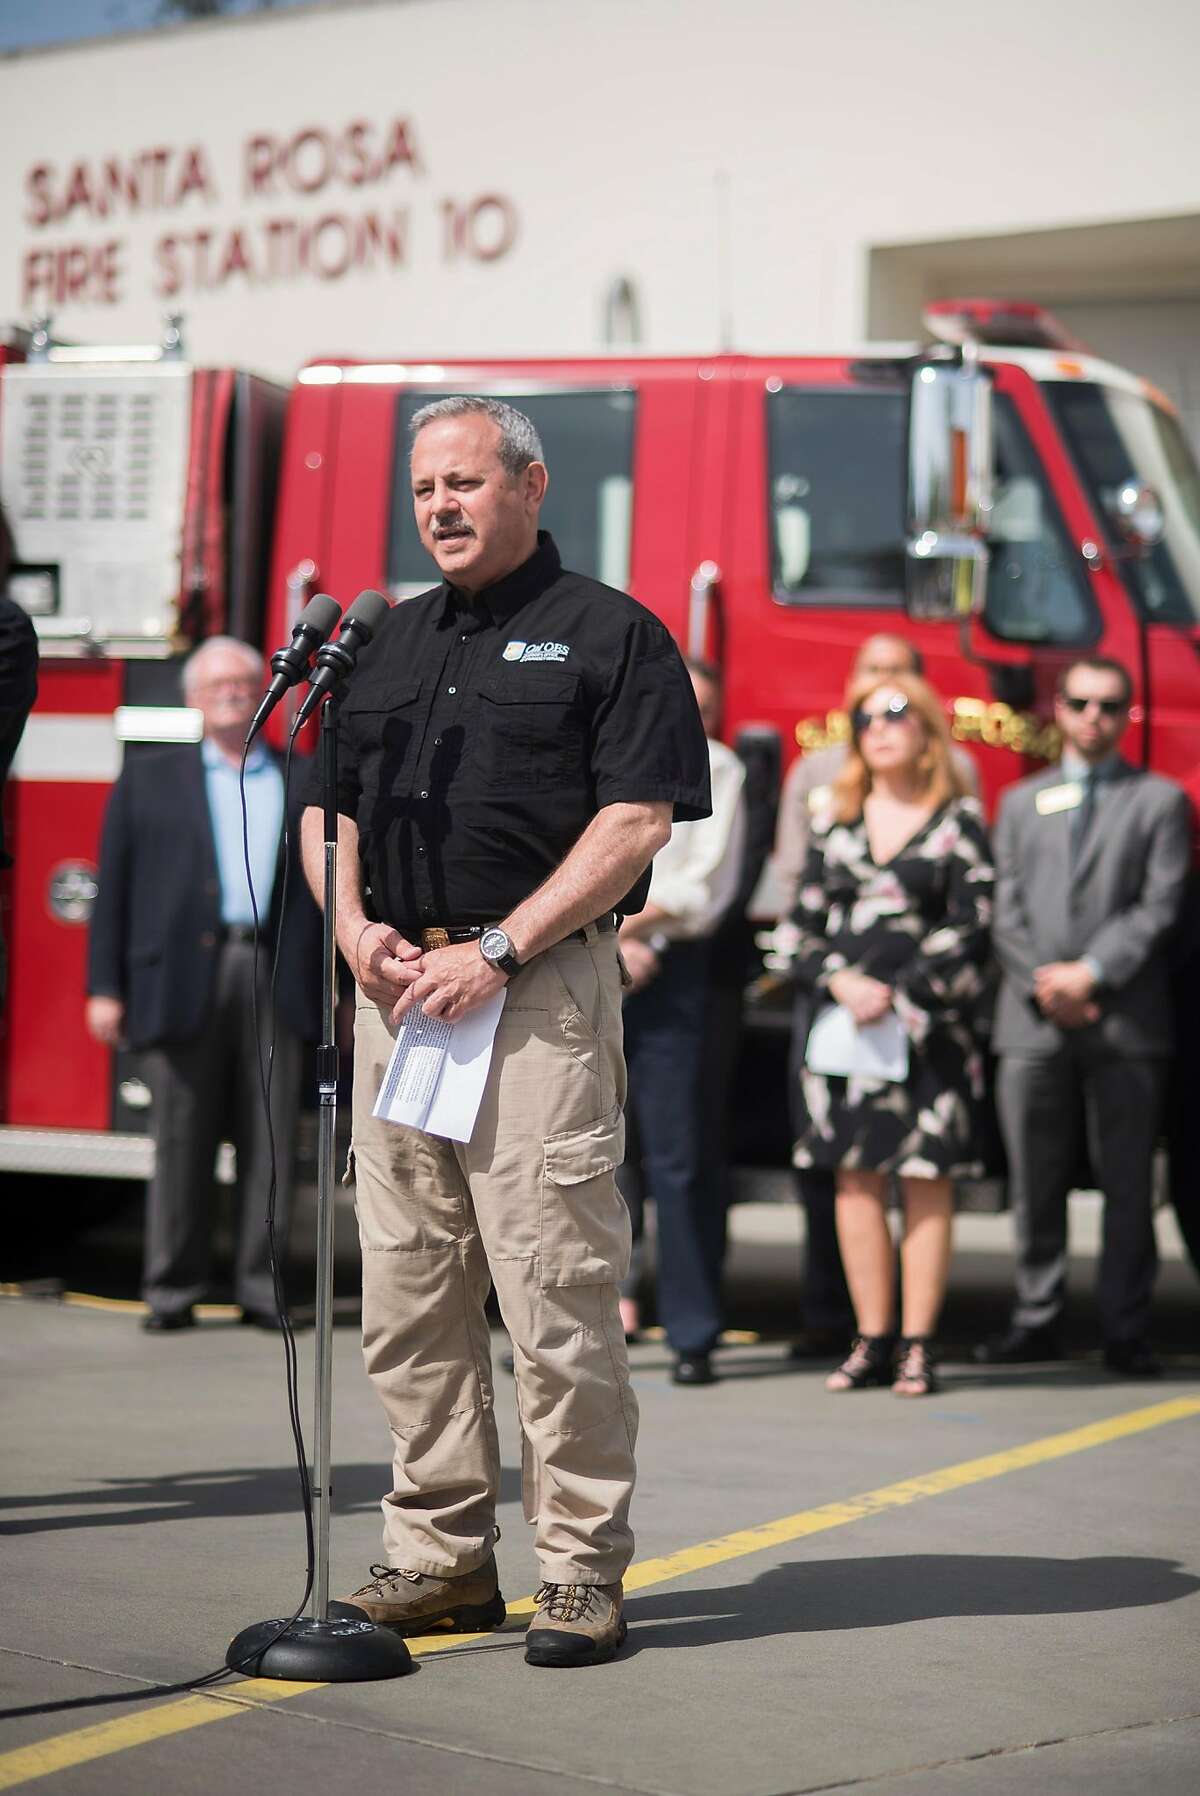 Nearly six months after one of the largest debris removal operations in state history began, state, local and federal partner agencies have finished clean-up from the destructive Northern California wildfires of 2017. Representatives from various agencies addressed the media at a press conference on May 10, 2018 in Santa Rosa, CA. Cal OES Director, Mark Ghilarducci address the media at the press conference.